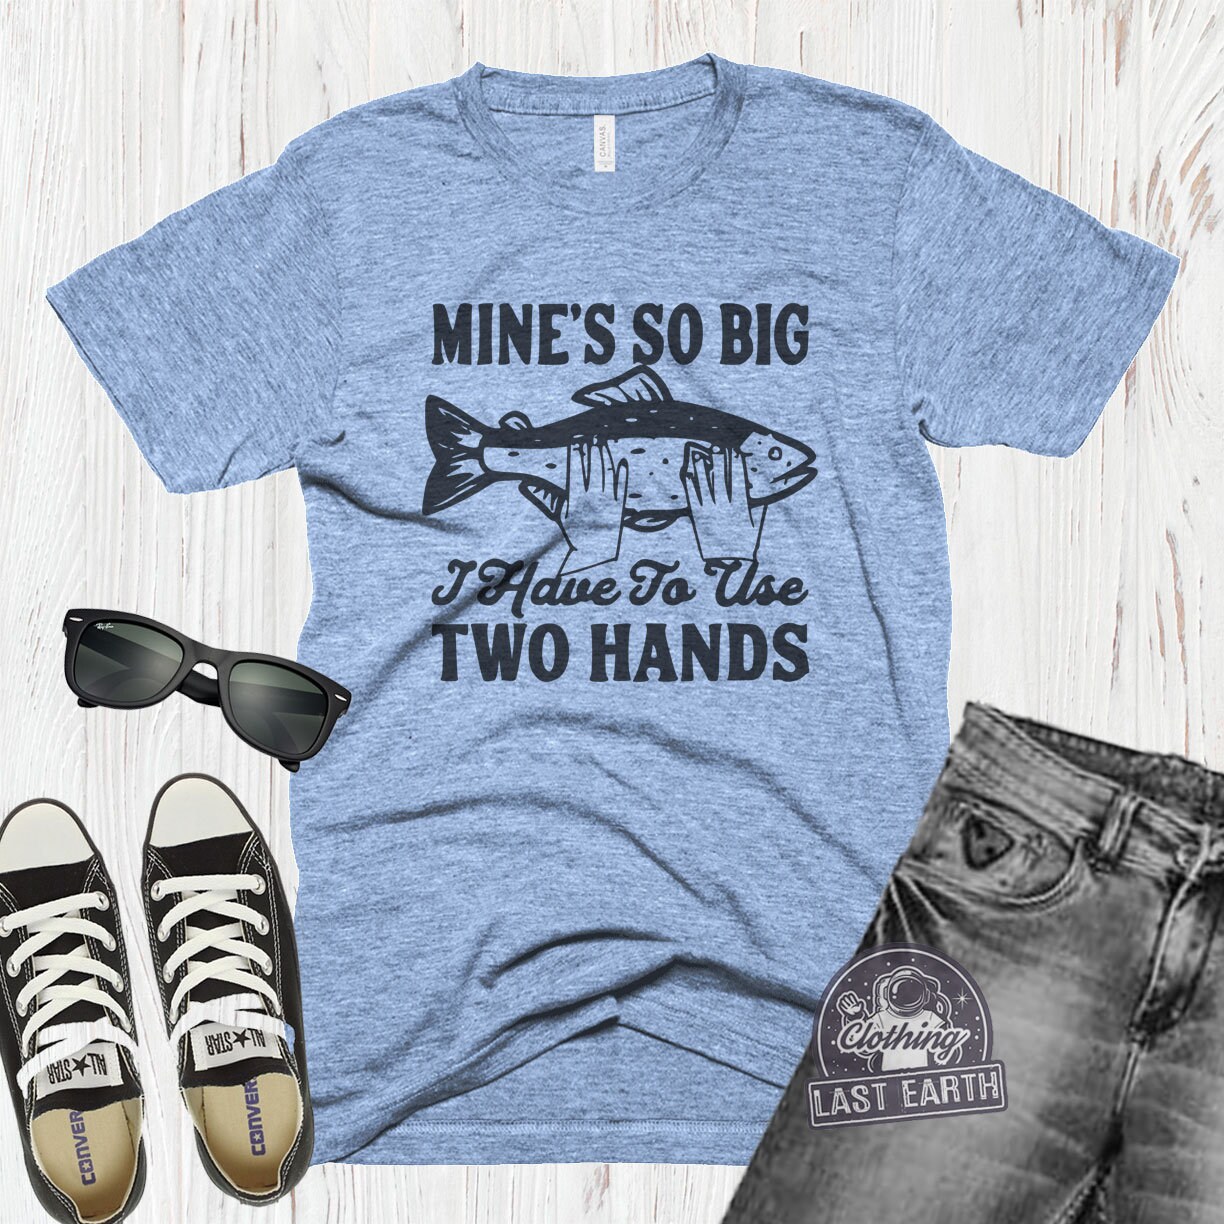 Fishing T Shirt, Funny Fishing Shirt, Fisherman Gifts, Sassy Quote Shirt, Mine's So Big I Have to Use Two Hands Shirt, Gifts for Him